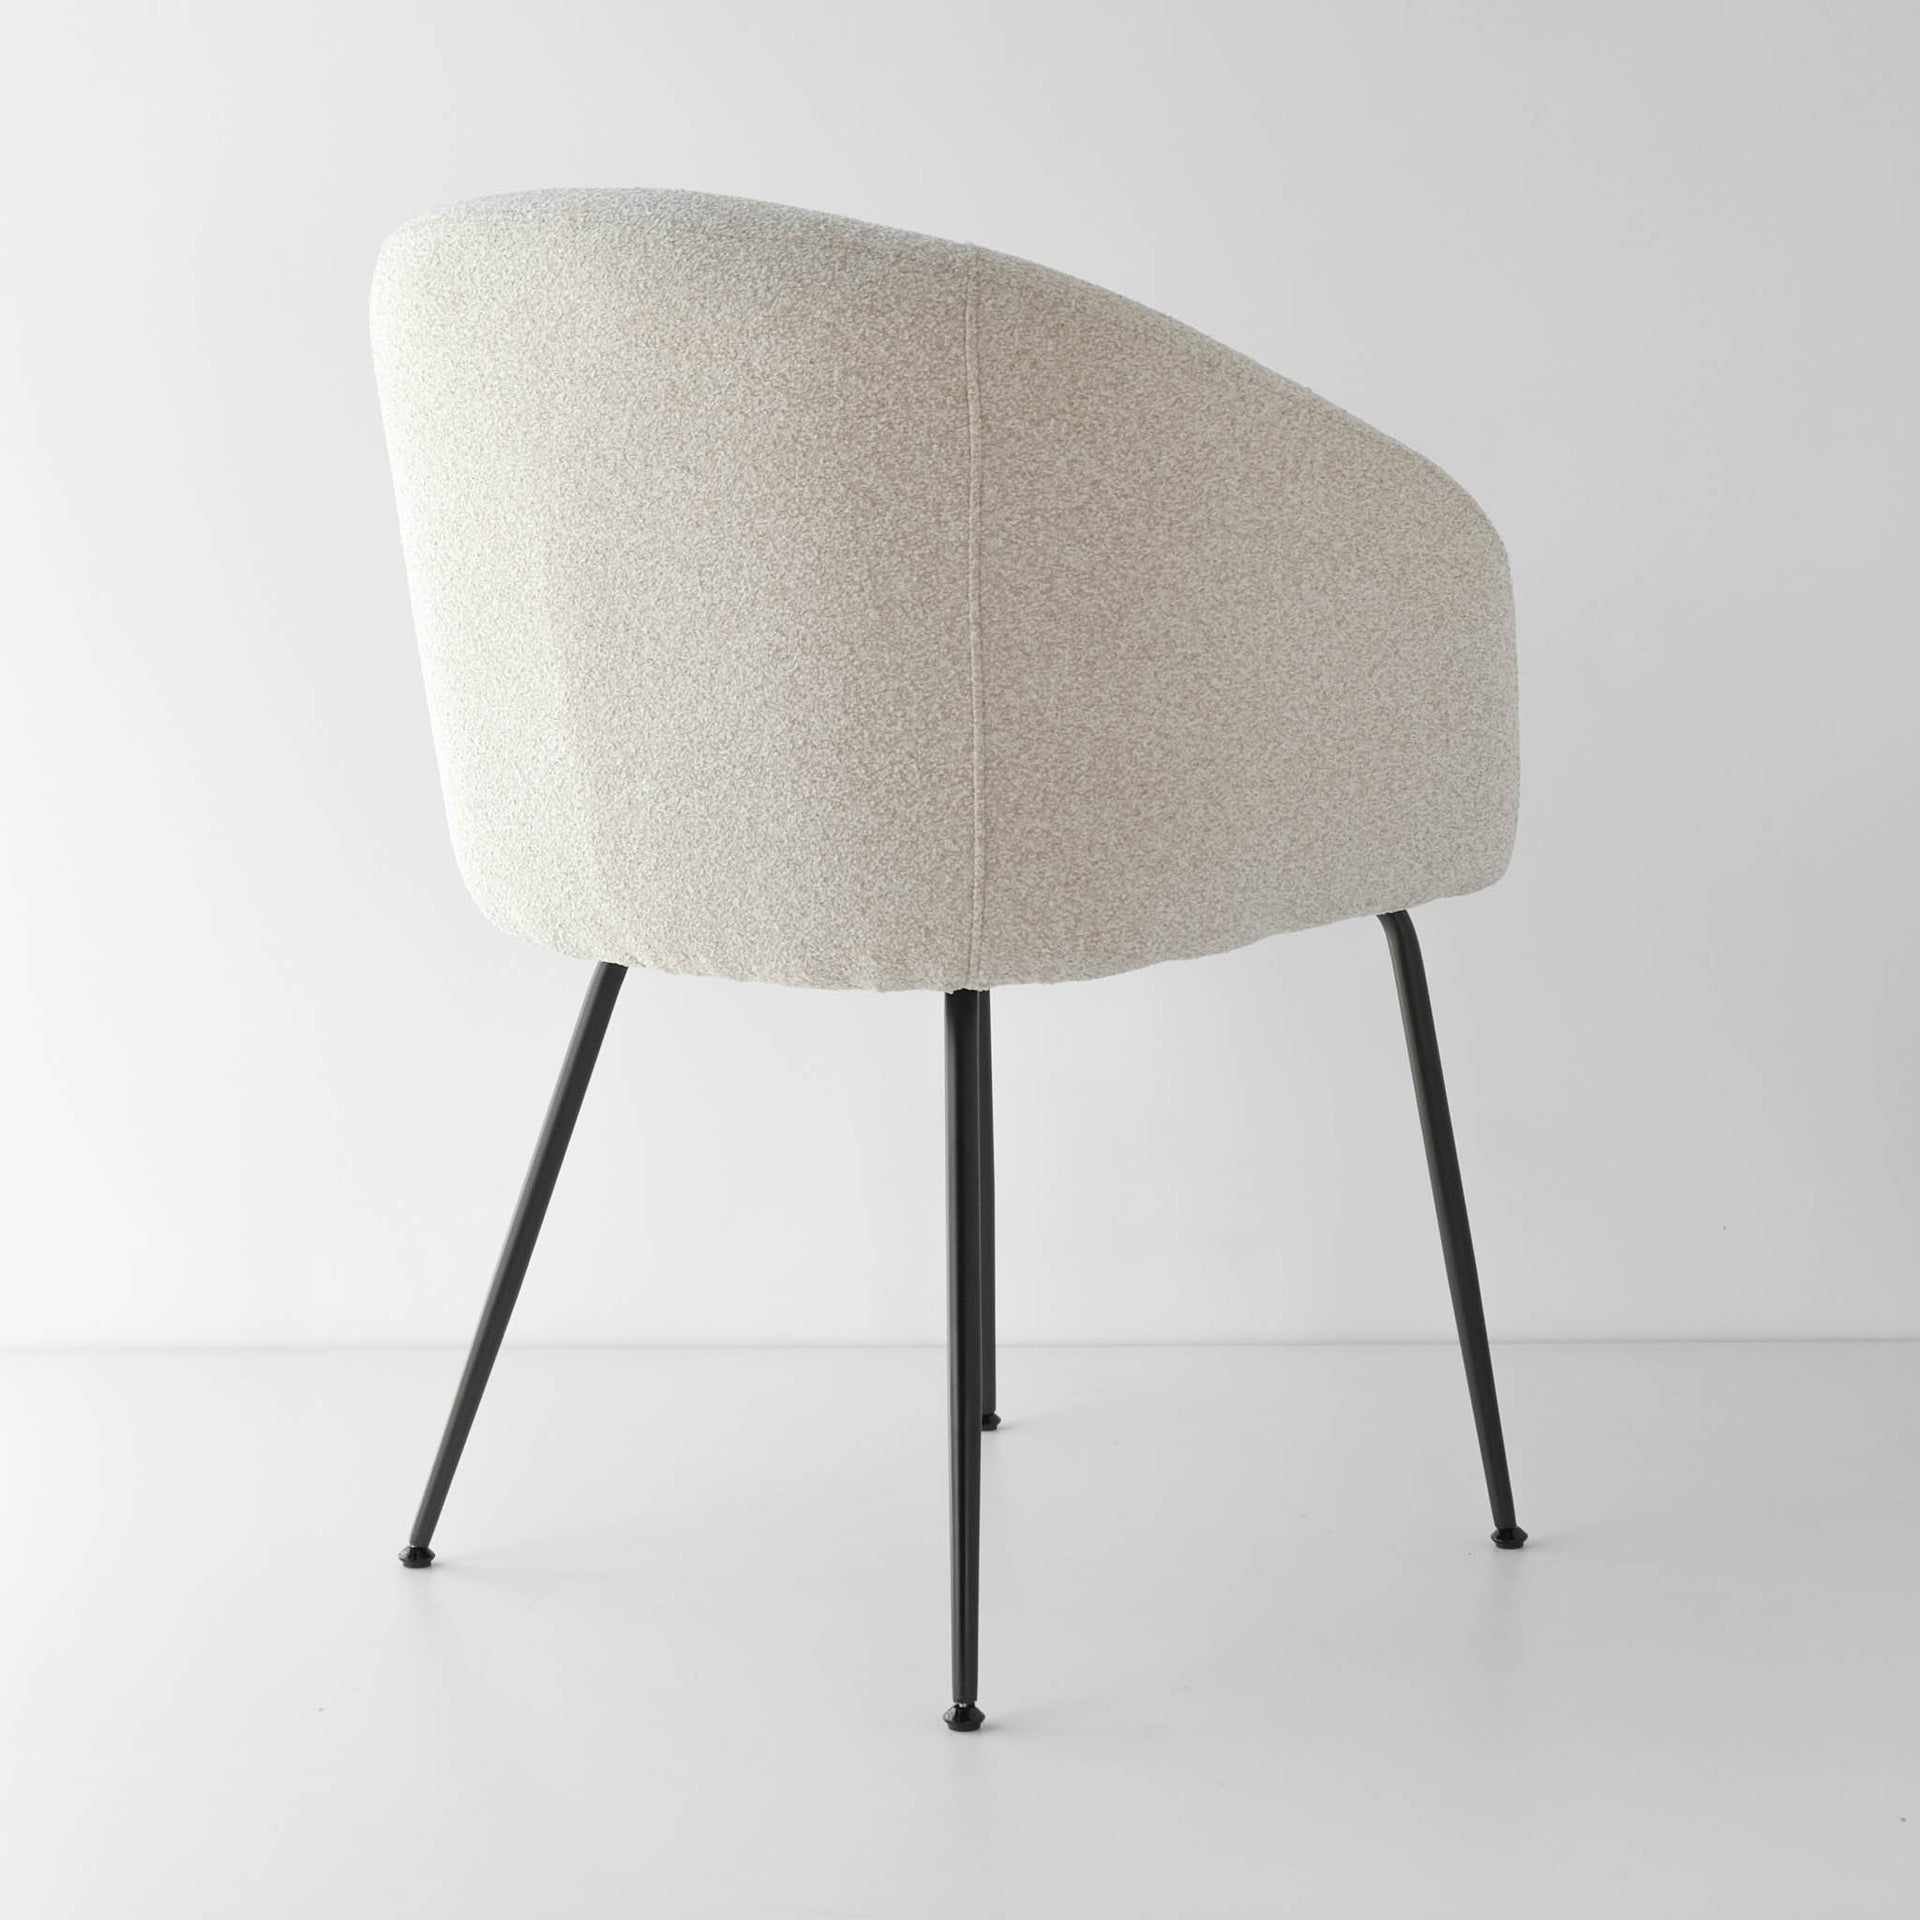 Back view of oatmeal dining chairs